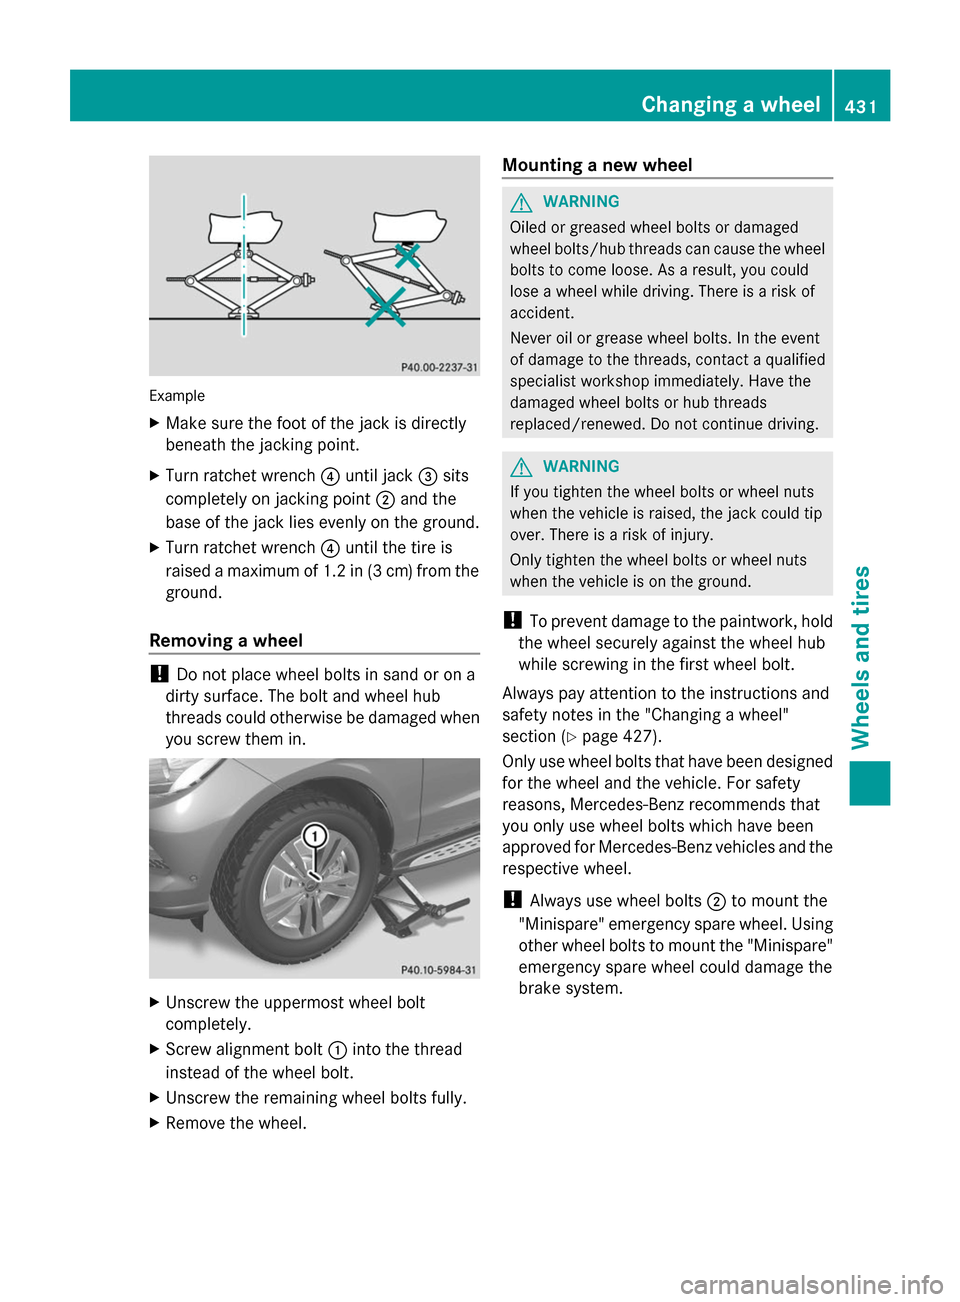 MERCEDES-BENZ GL-Class 2014 X166 Owners Manual Example
X
Make sure the foot of the jack is directly
beneath the jacking point.
X Turn ratchet wrench ?until jack =sits
completely on jacking point ;and the
base of the jack lies evenly on the ground.